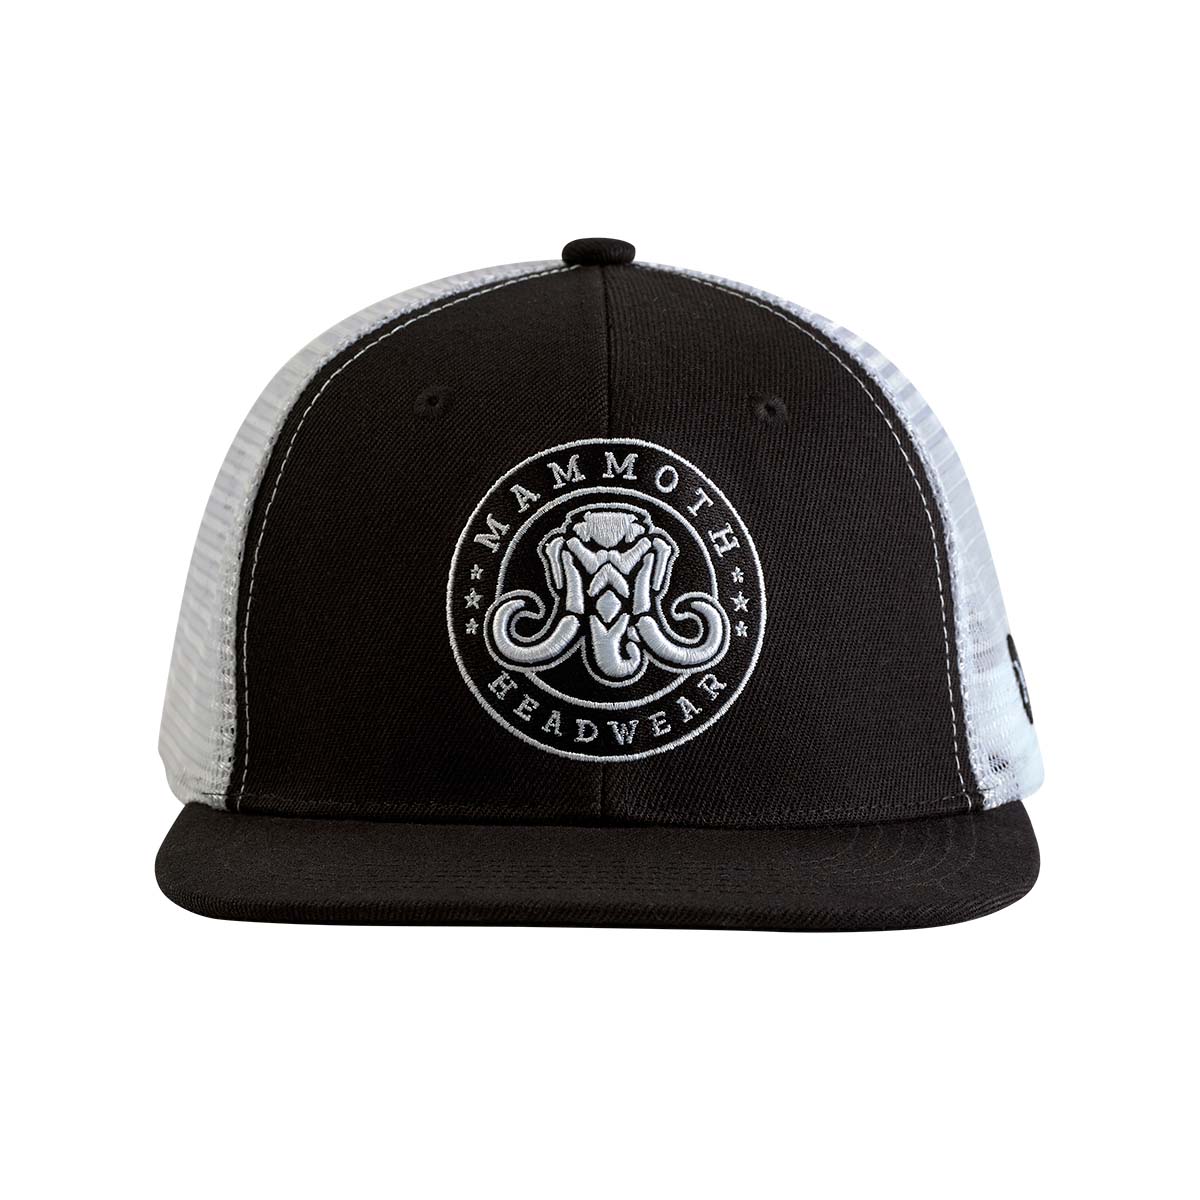 Classic Trucker Blacked Out Hat for Big Heads - Mammoth Headwear